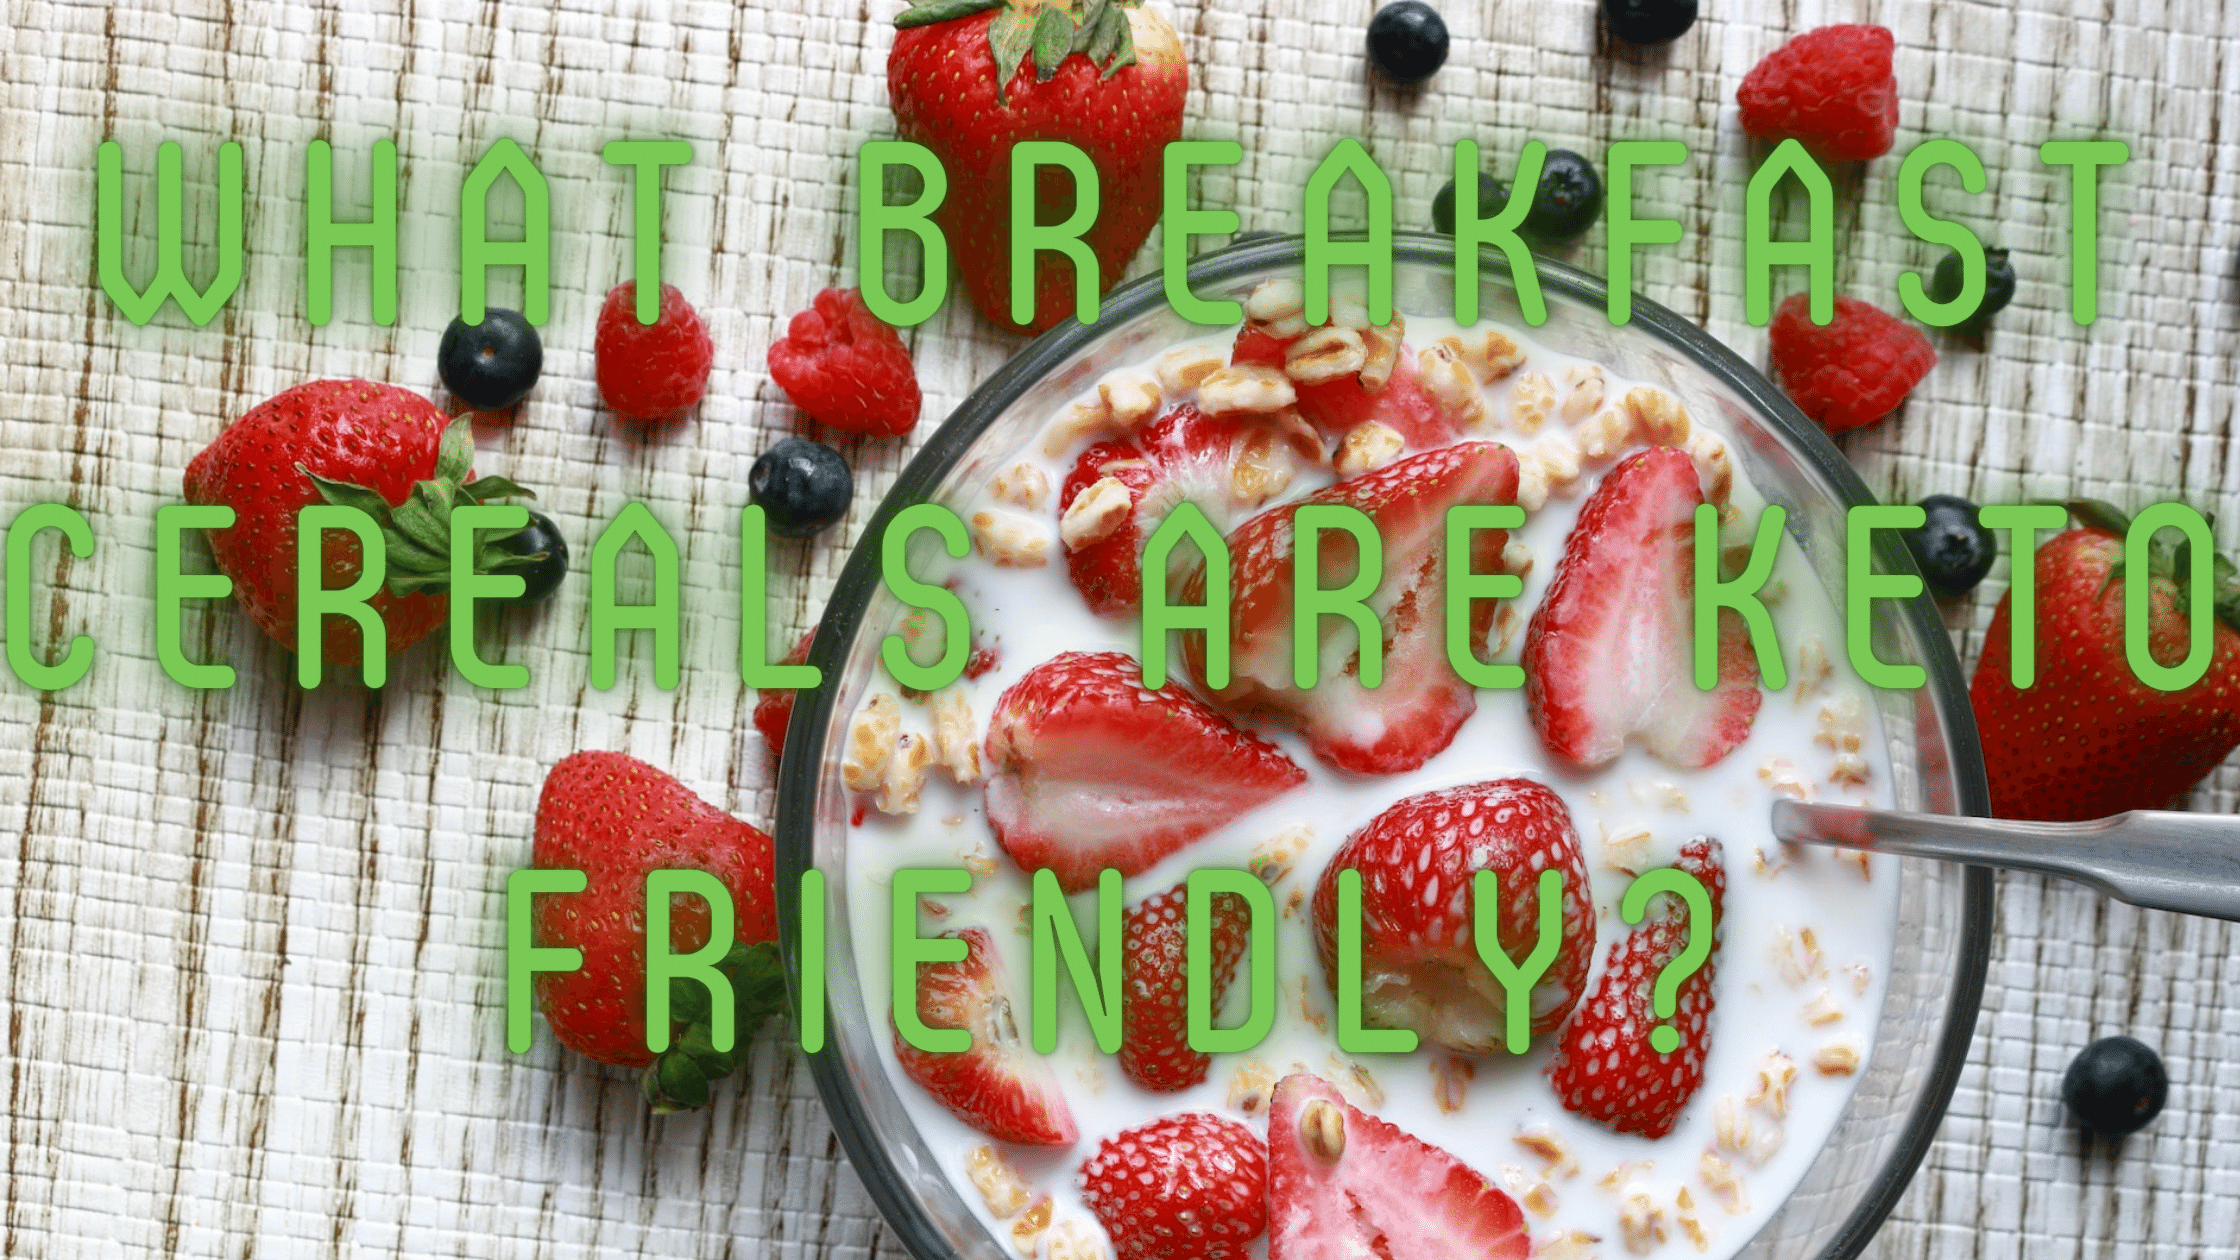 What breakfast cereals are keto friendly